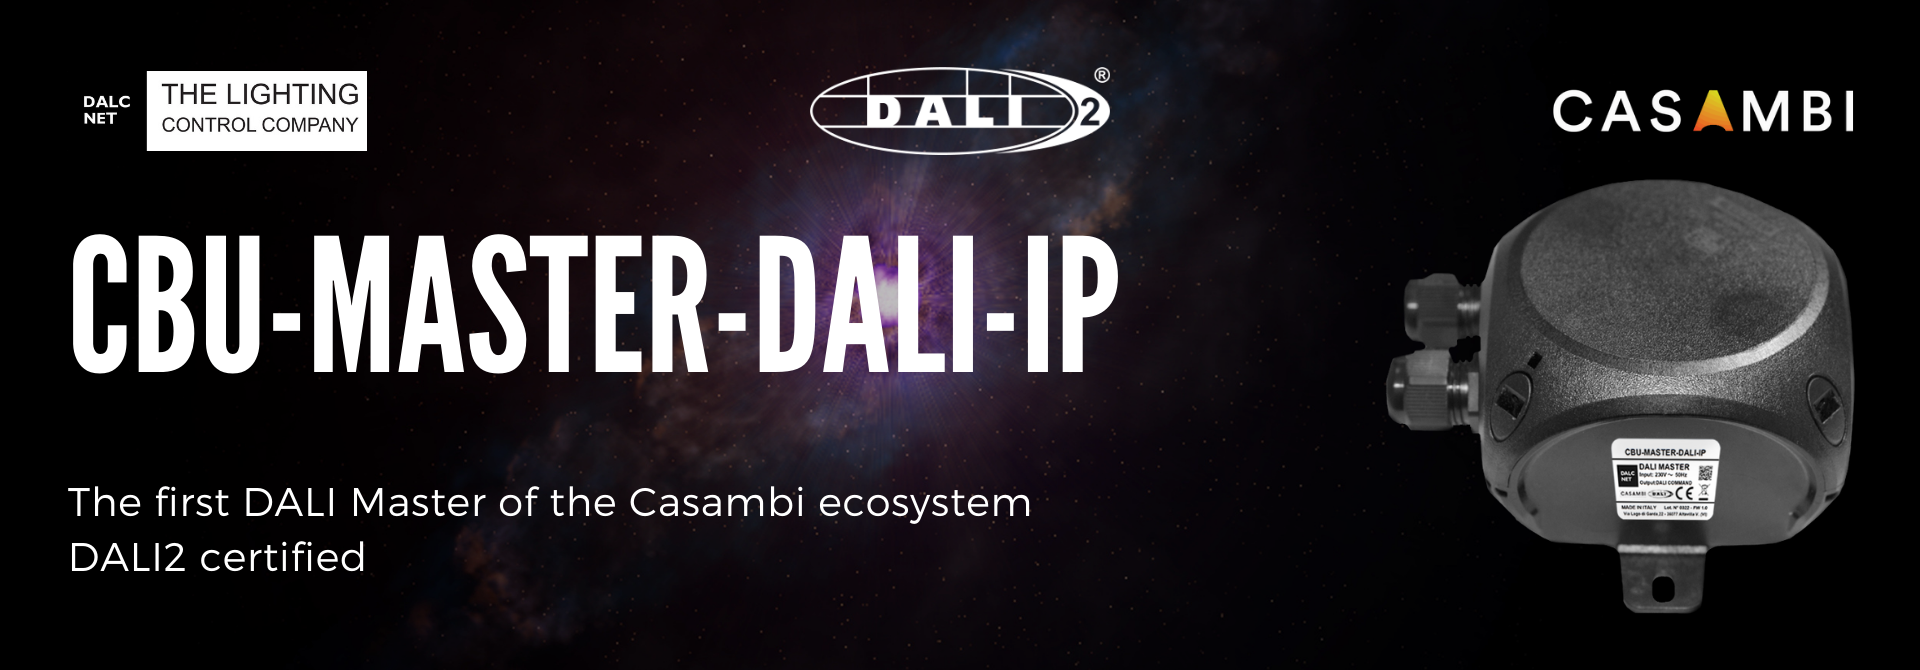 The first DALI Master of the Casambi ecosystem DALI2 certified